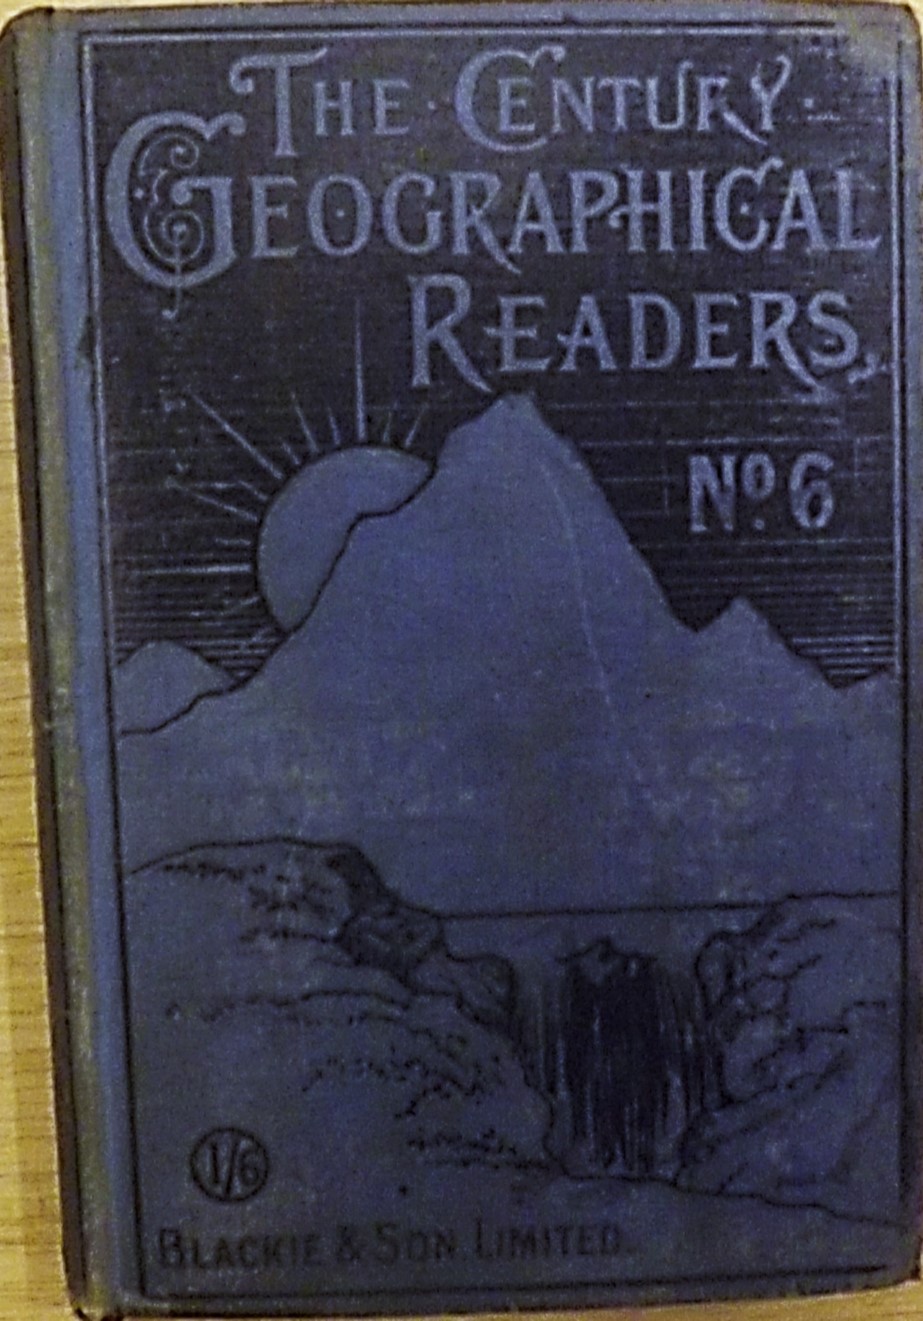 The Century Geographical Readers No. 6, 1890